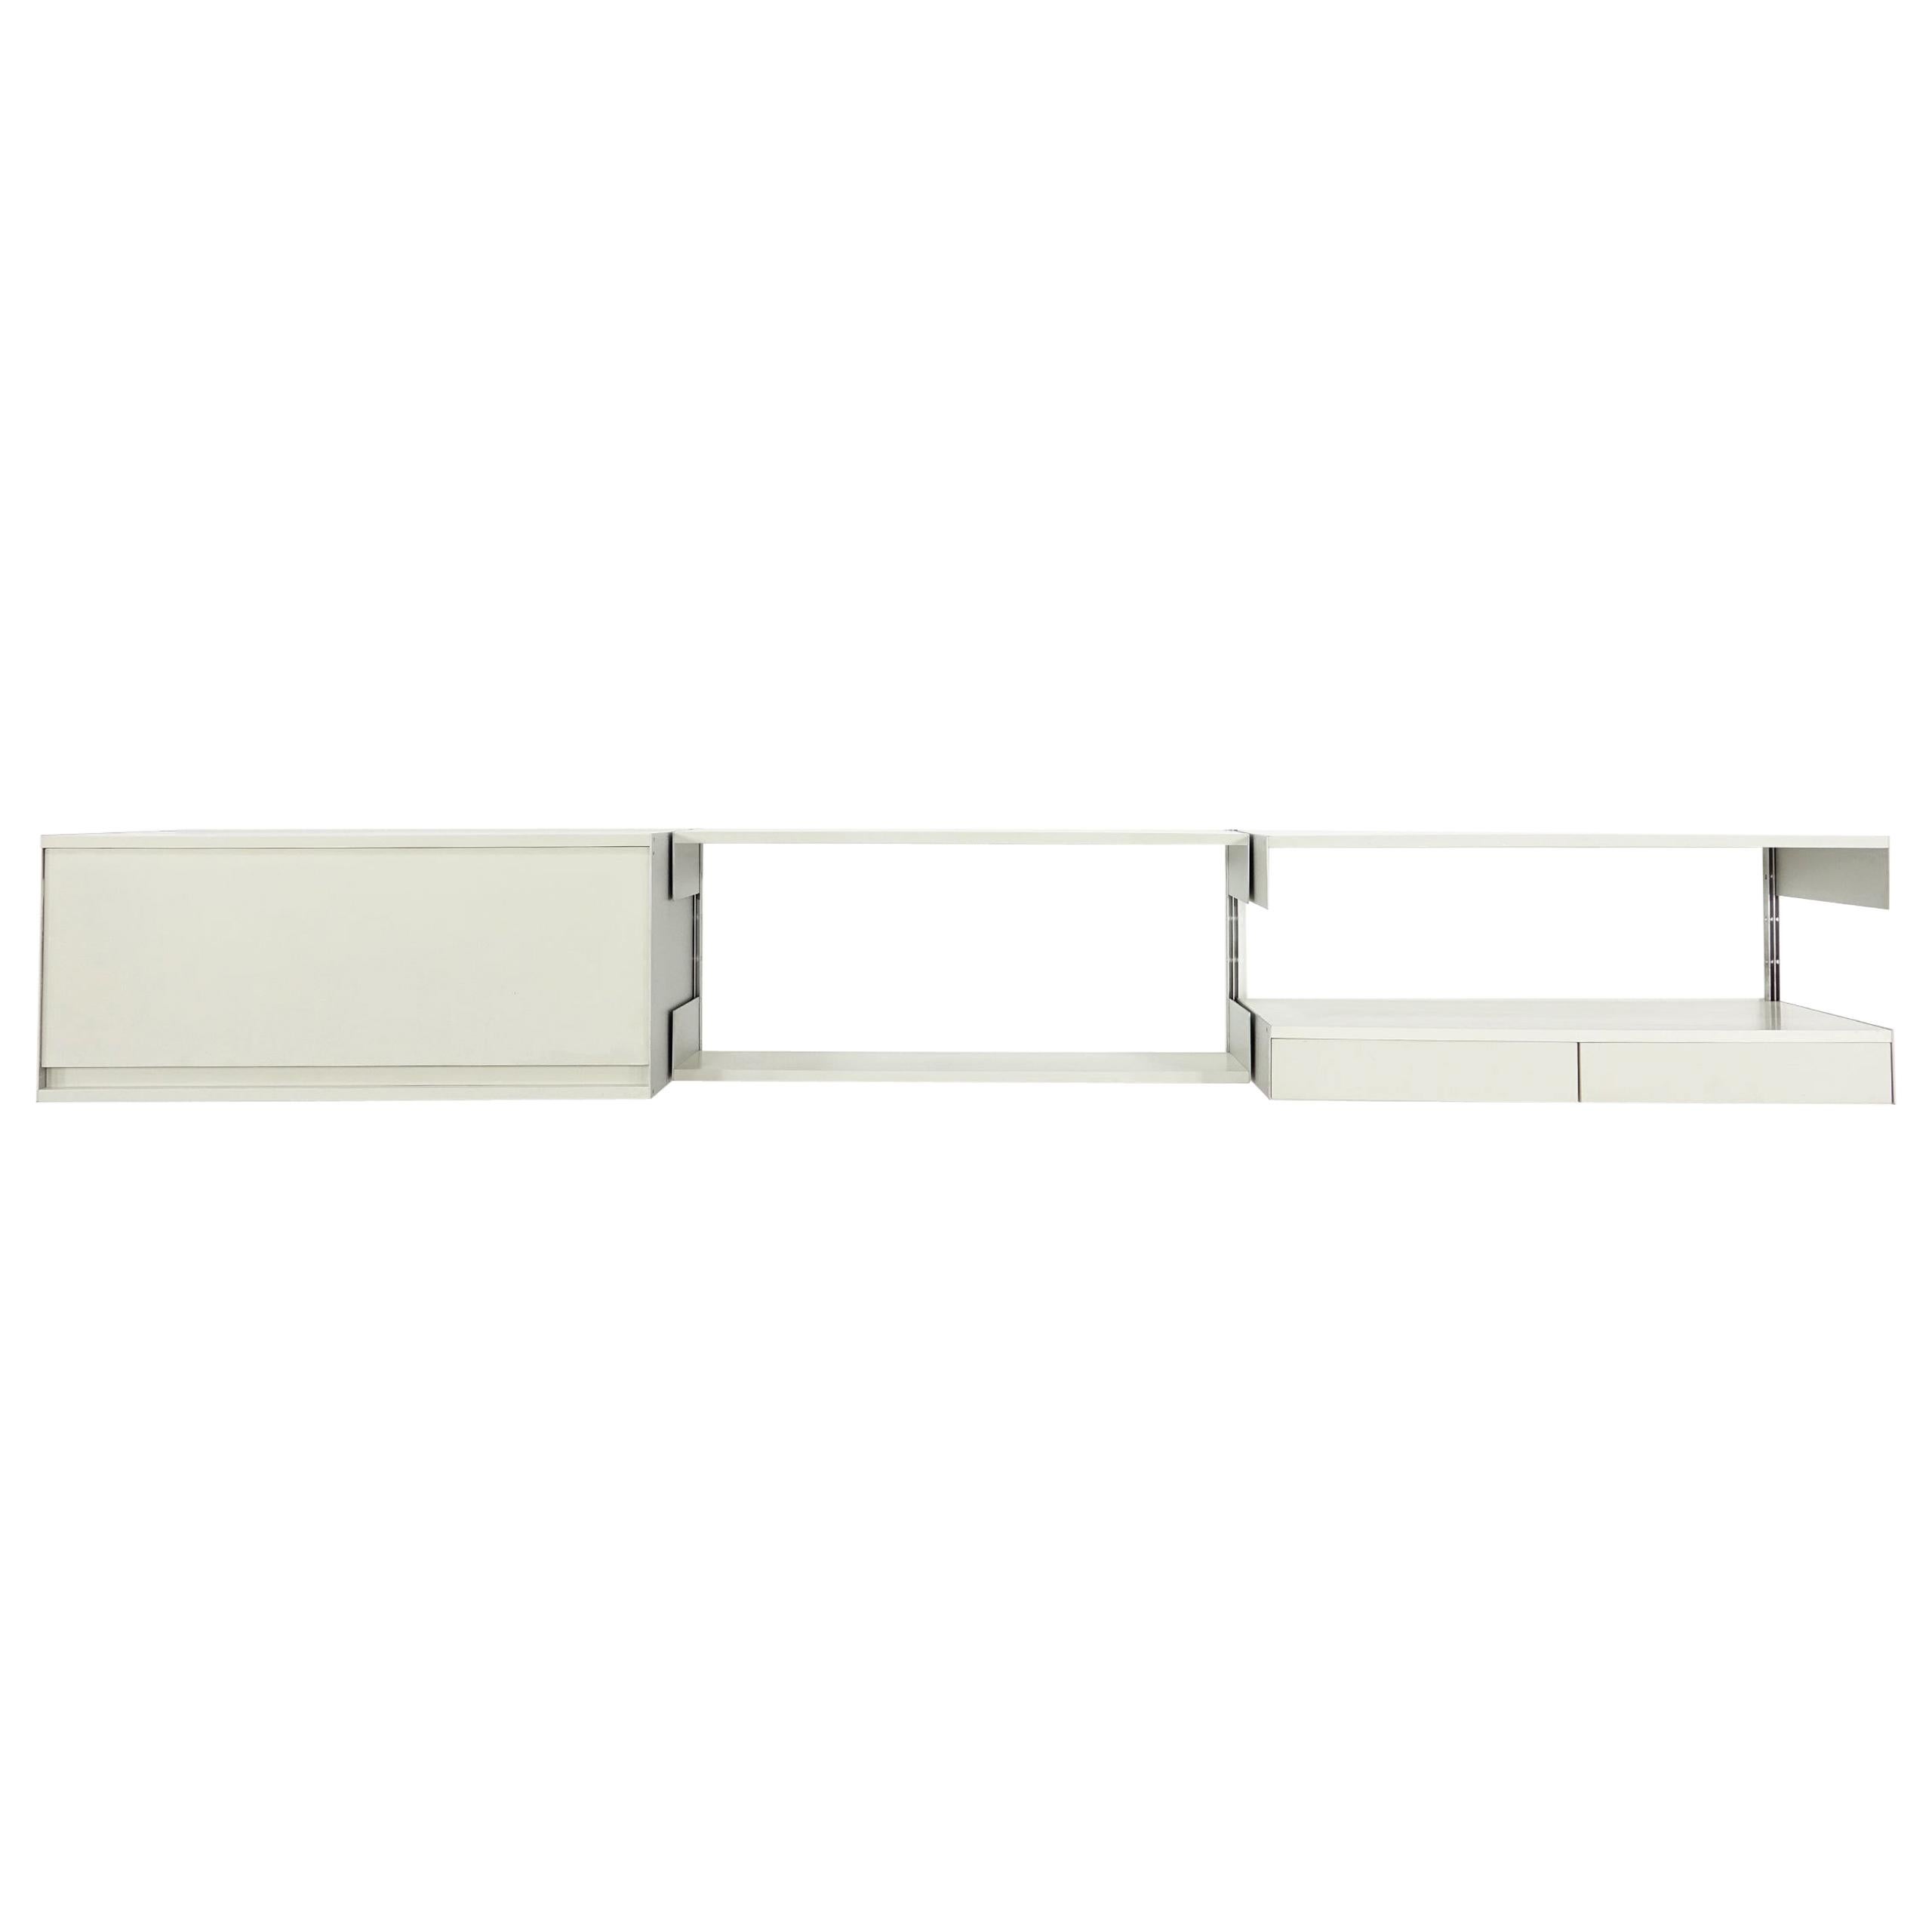 Dieter Rams Sideboard 606 Universal Shelving System for Vitsœ, Germany, 1965